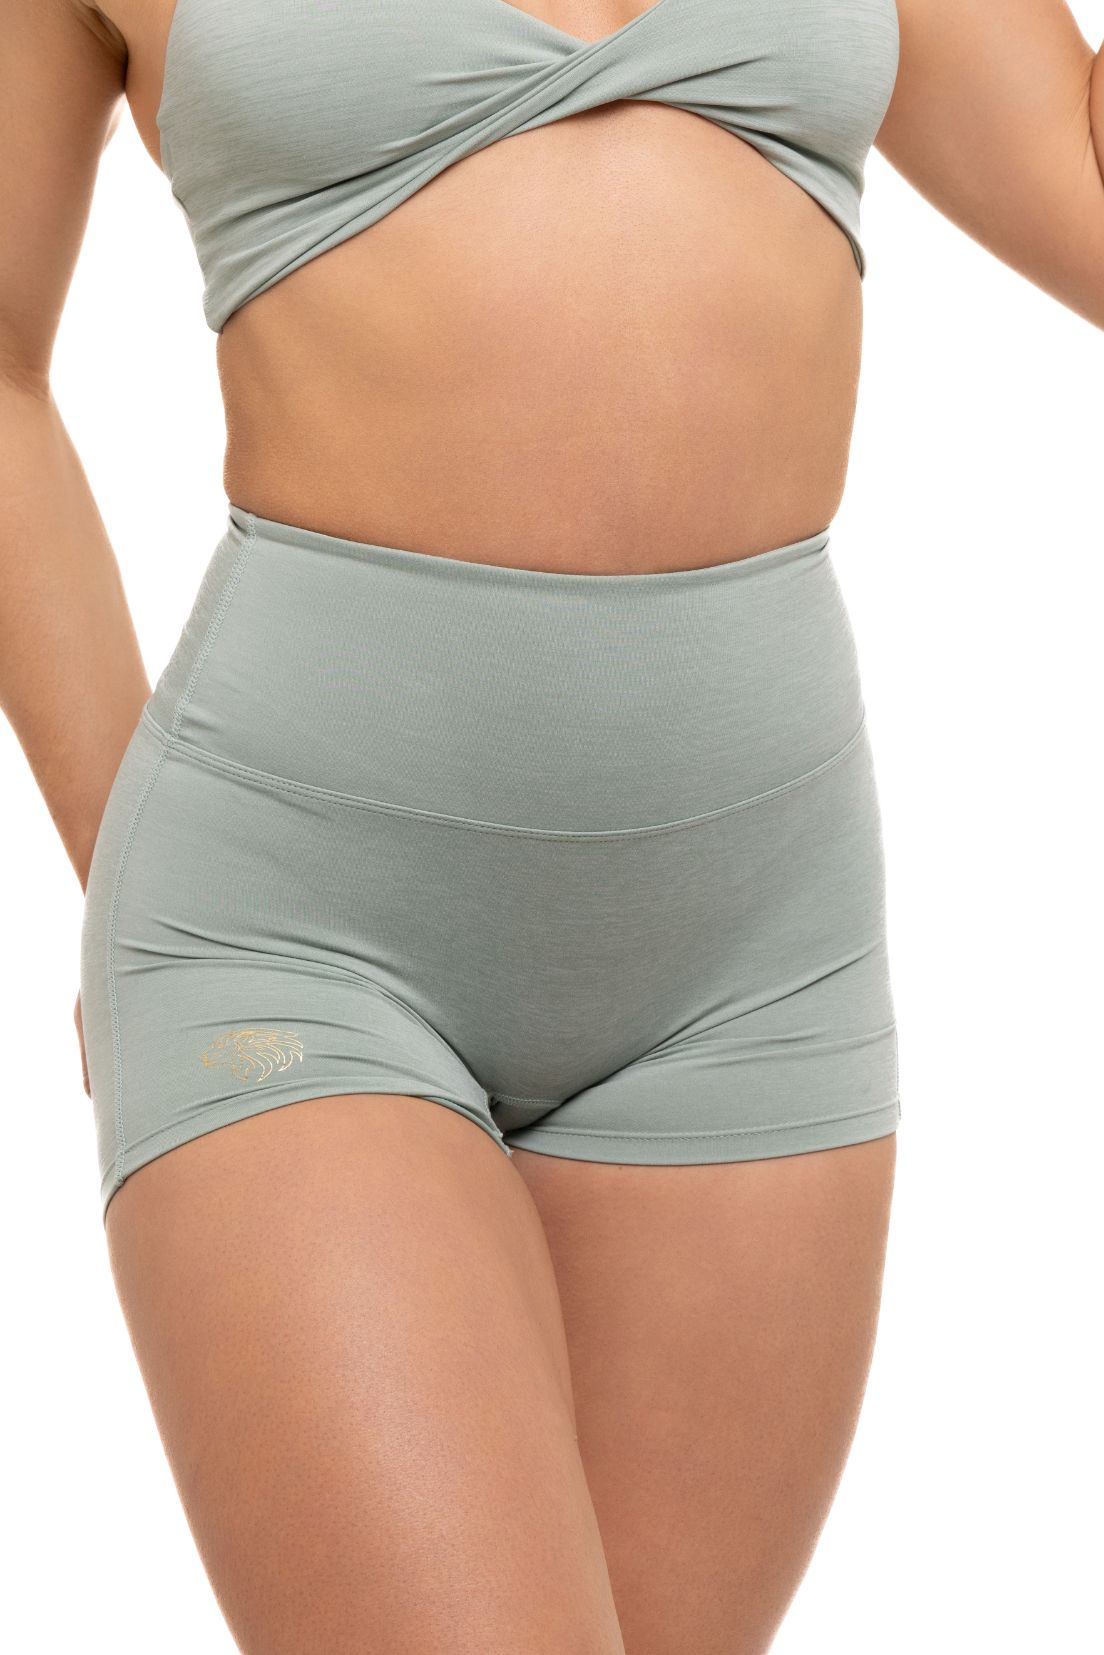 Affordable Women's Activewear Shorts.